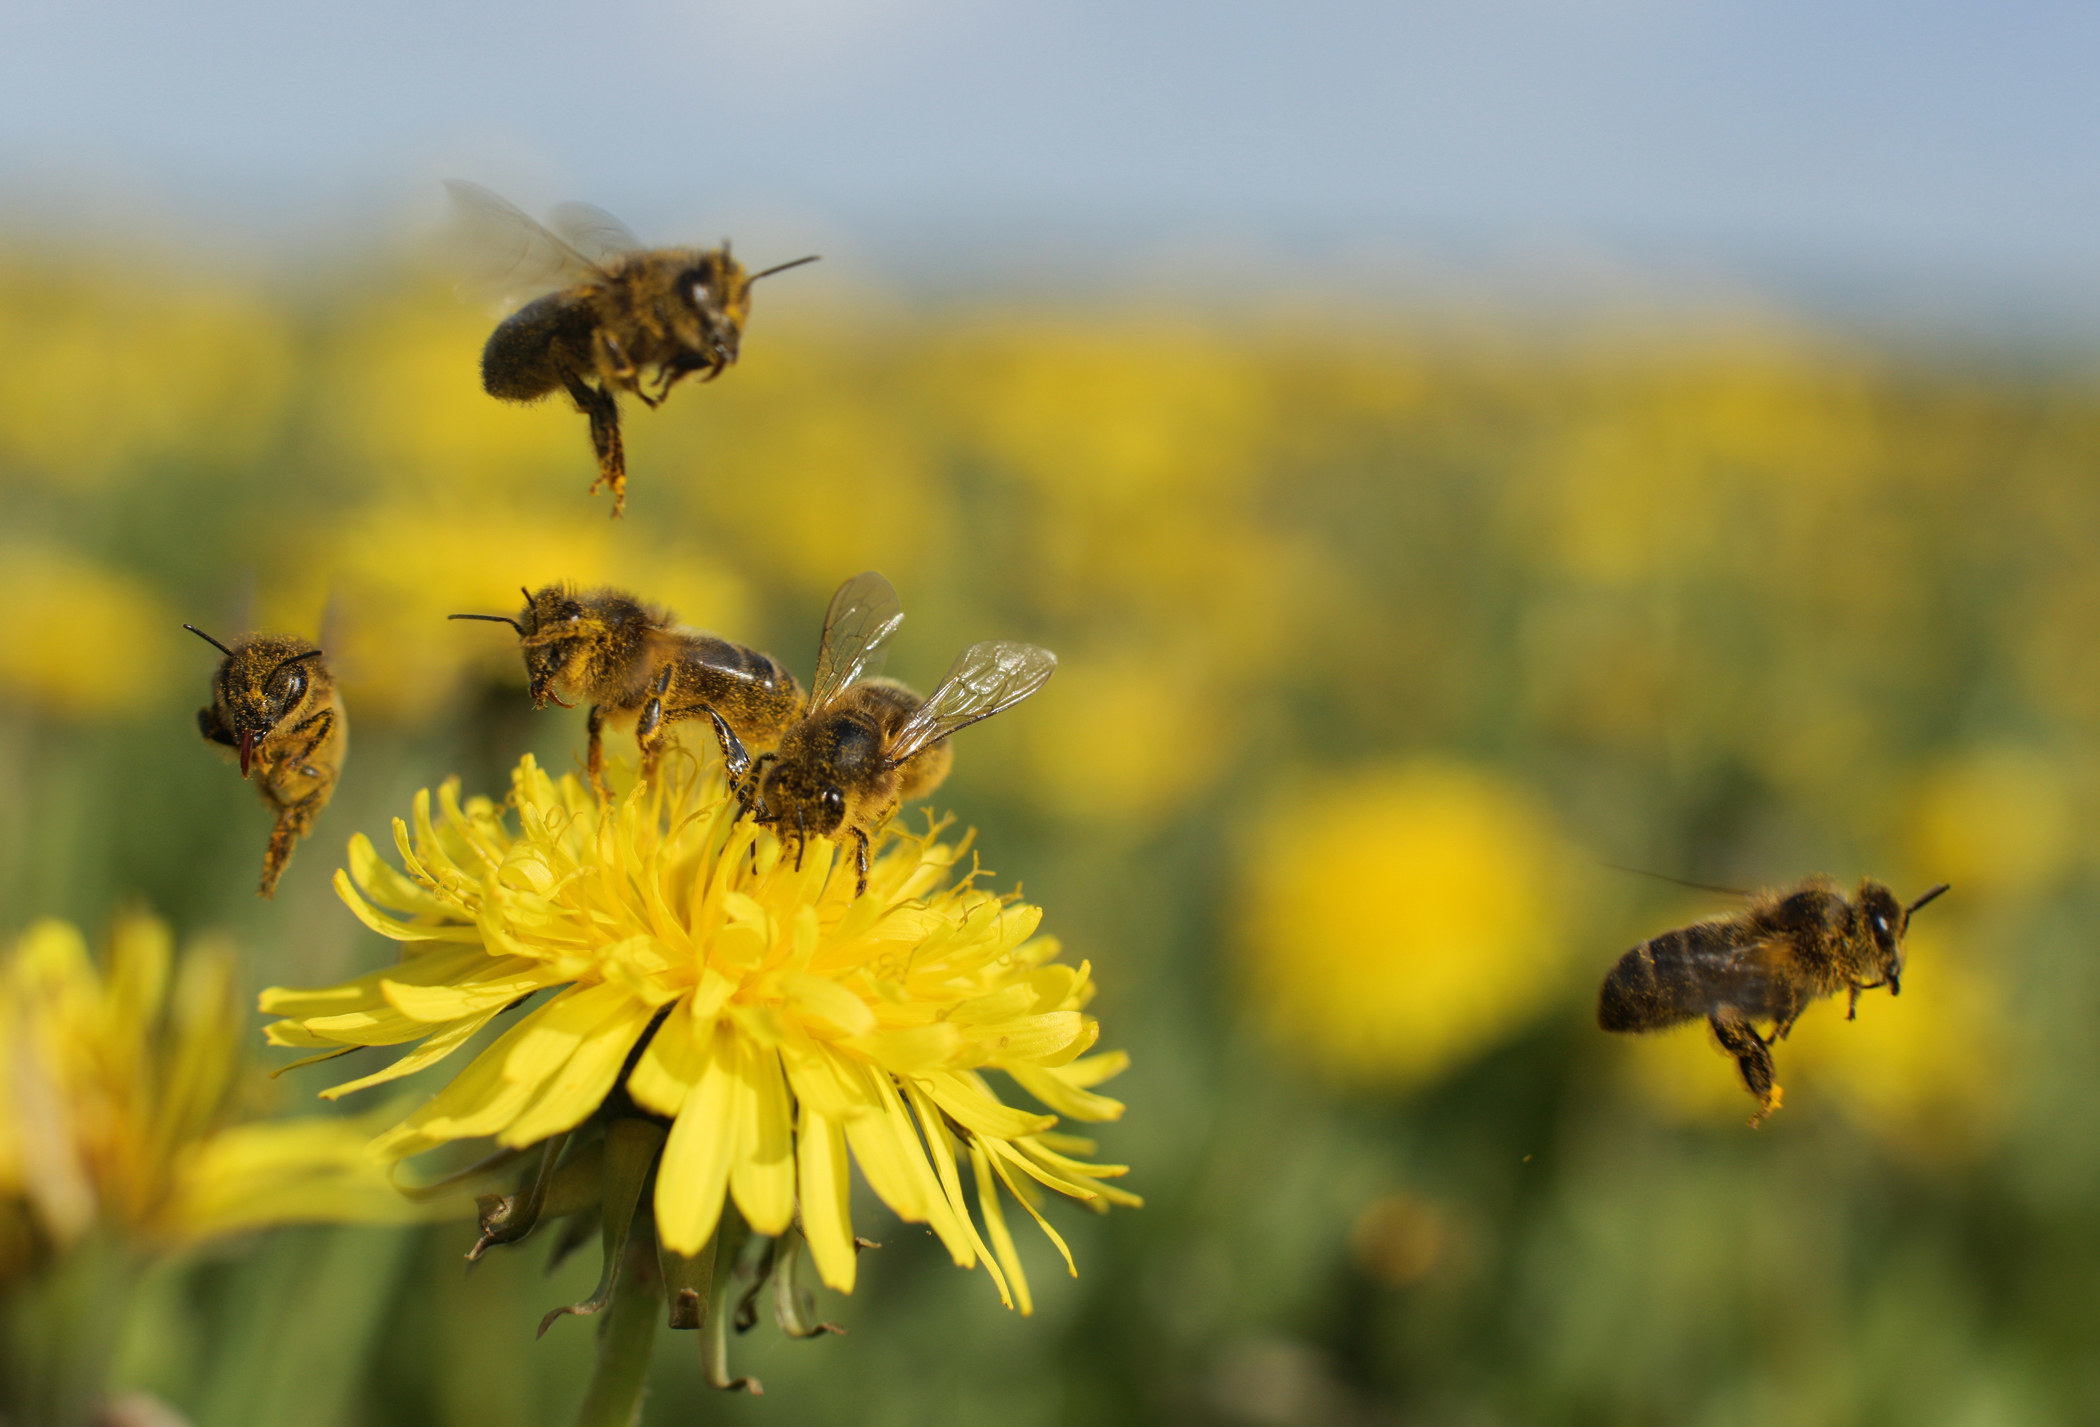 A stock image of five bees flying from a dandelion in a field